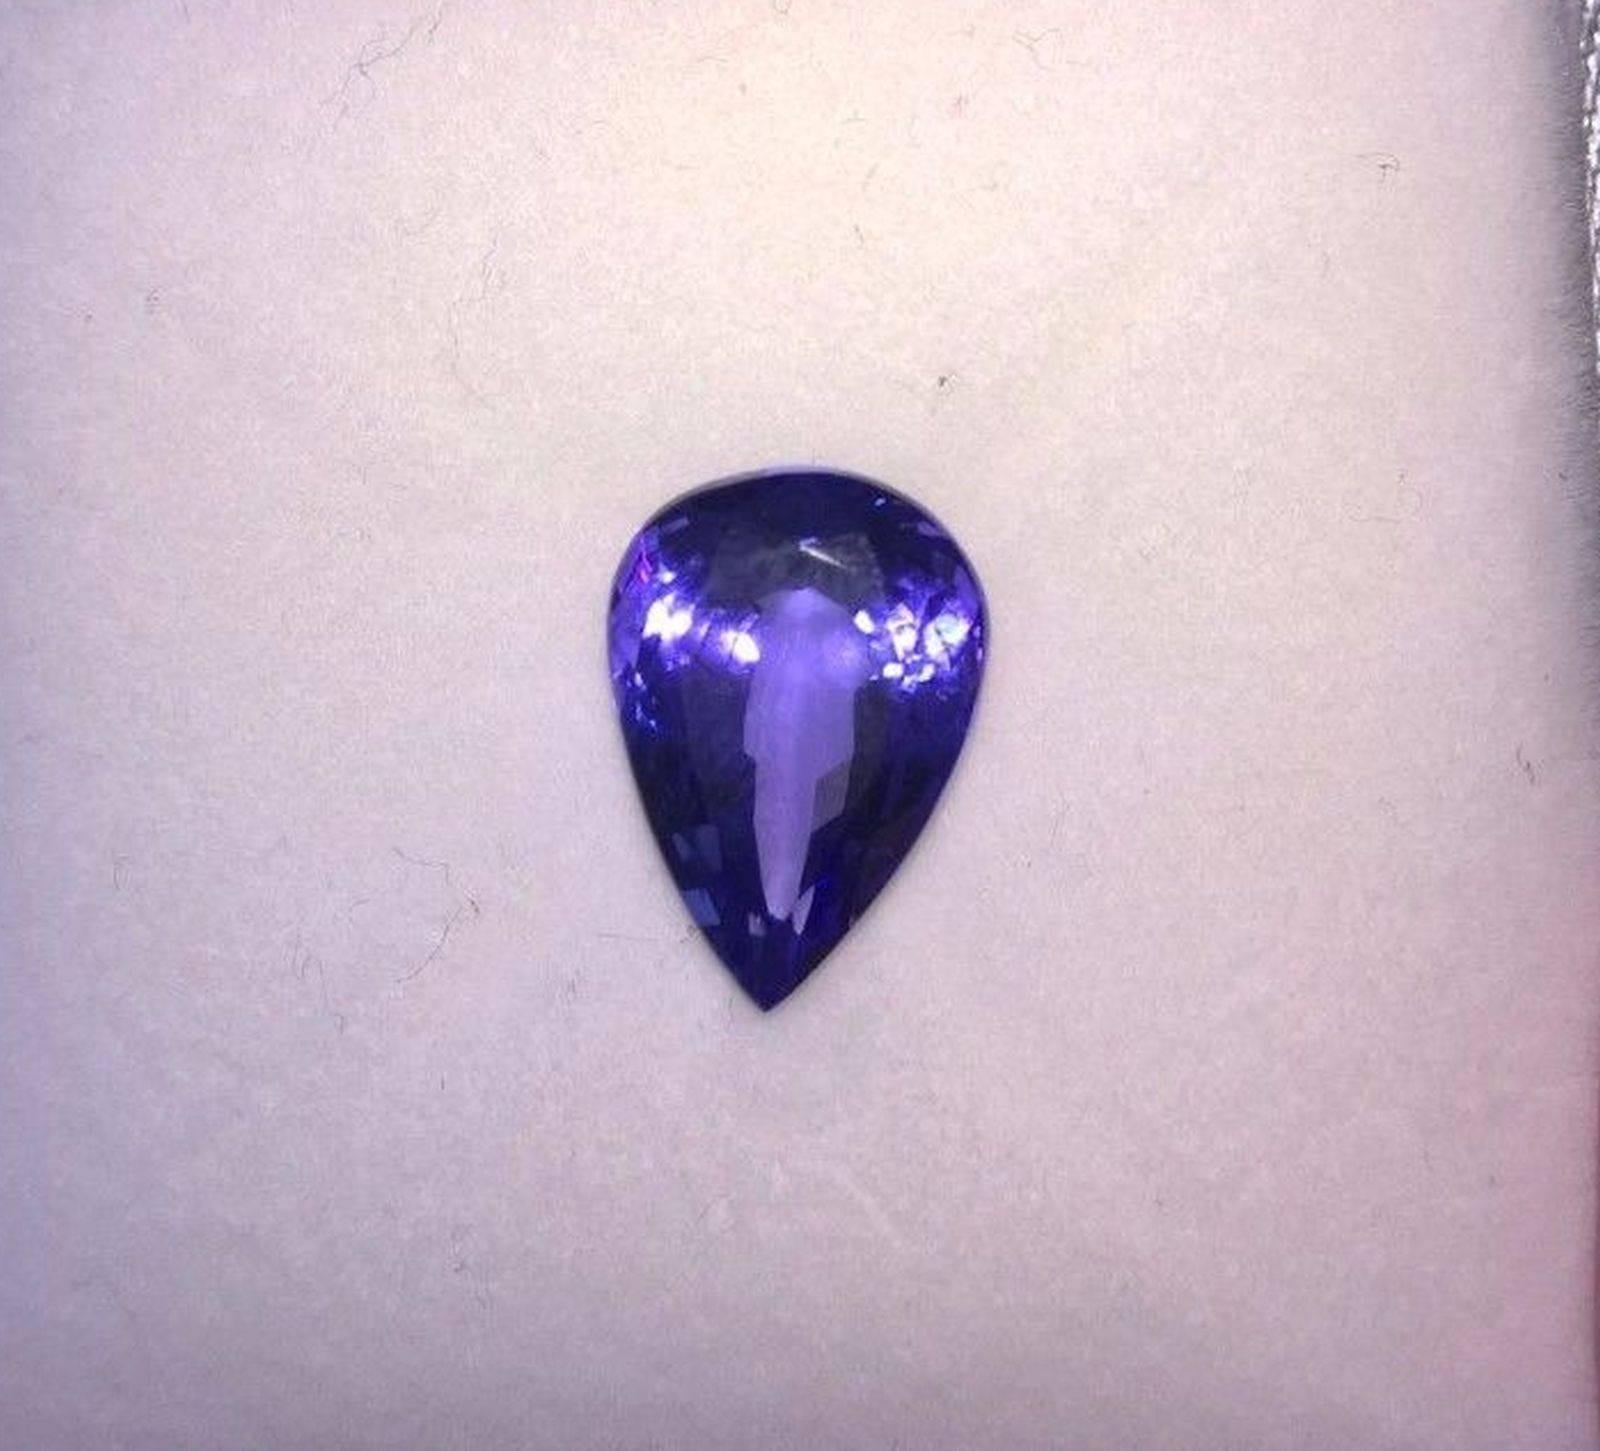 Brand new large pear shape tanzanite.  This is a stunnng stone complete with a GIA grading certificate.  It is lovely and vivid - not washed out and pale like some you see. 

This would make an amazing pendant with either a small diamond set at the